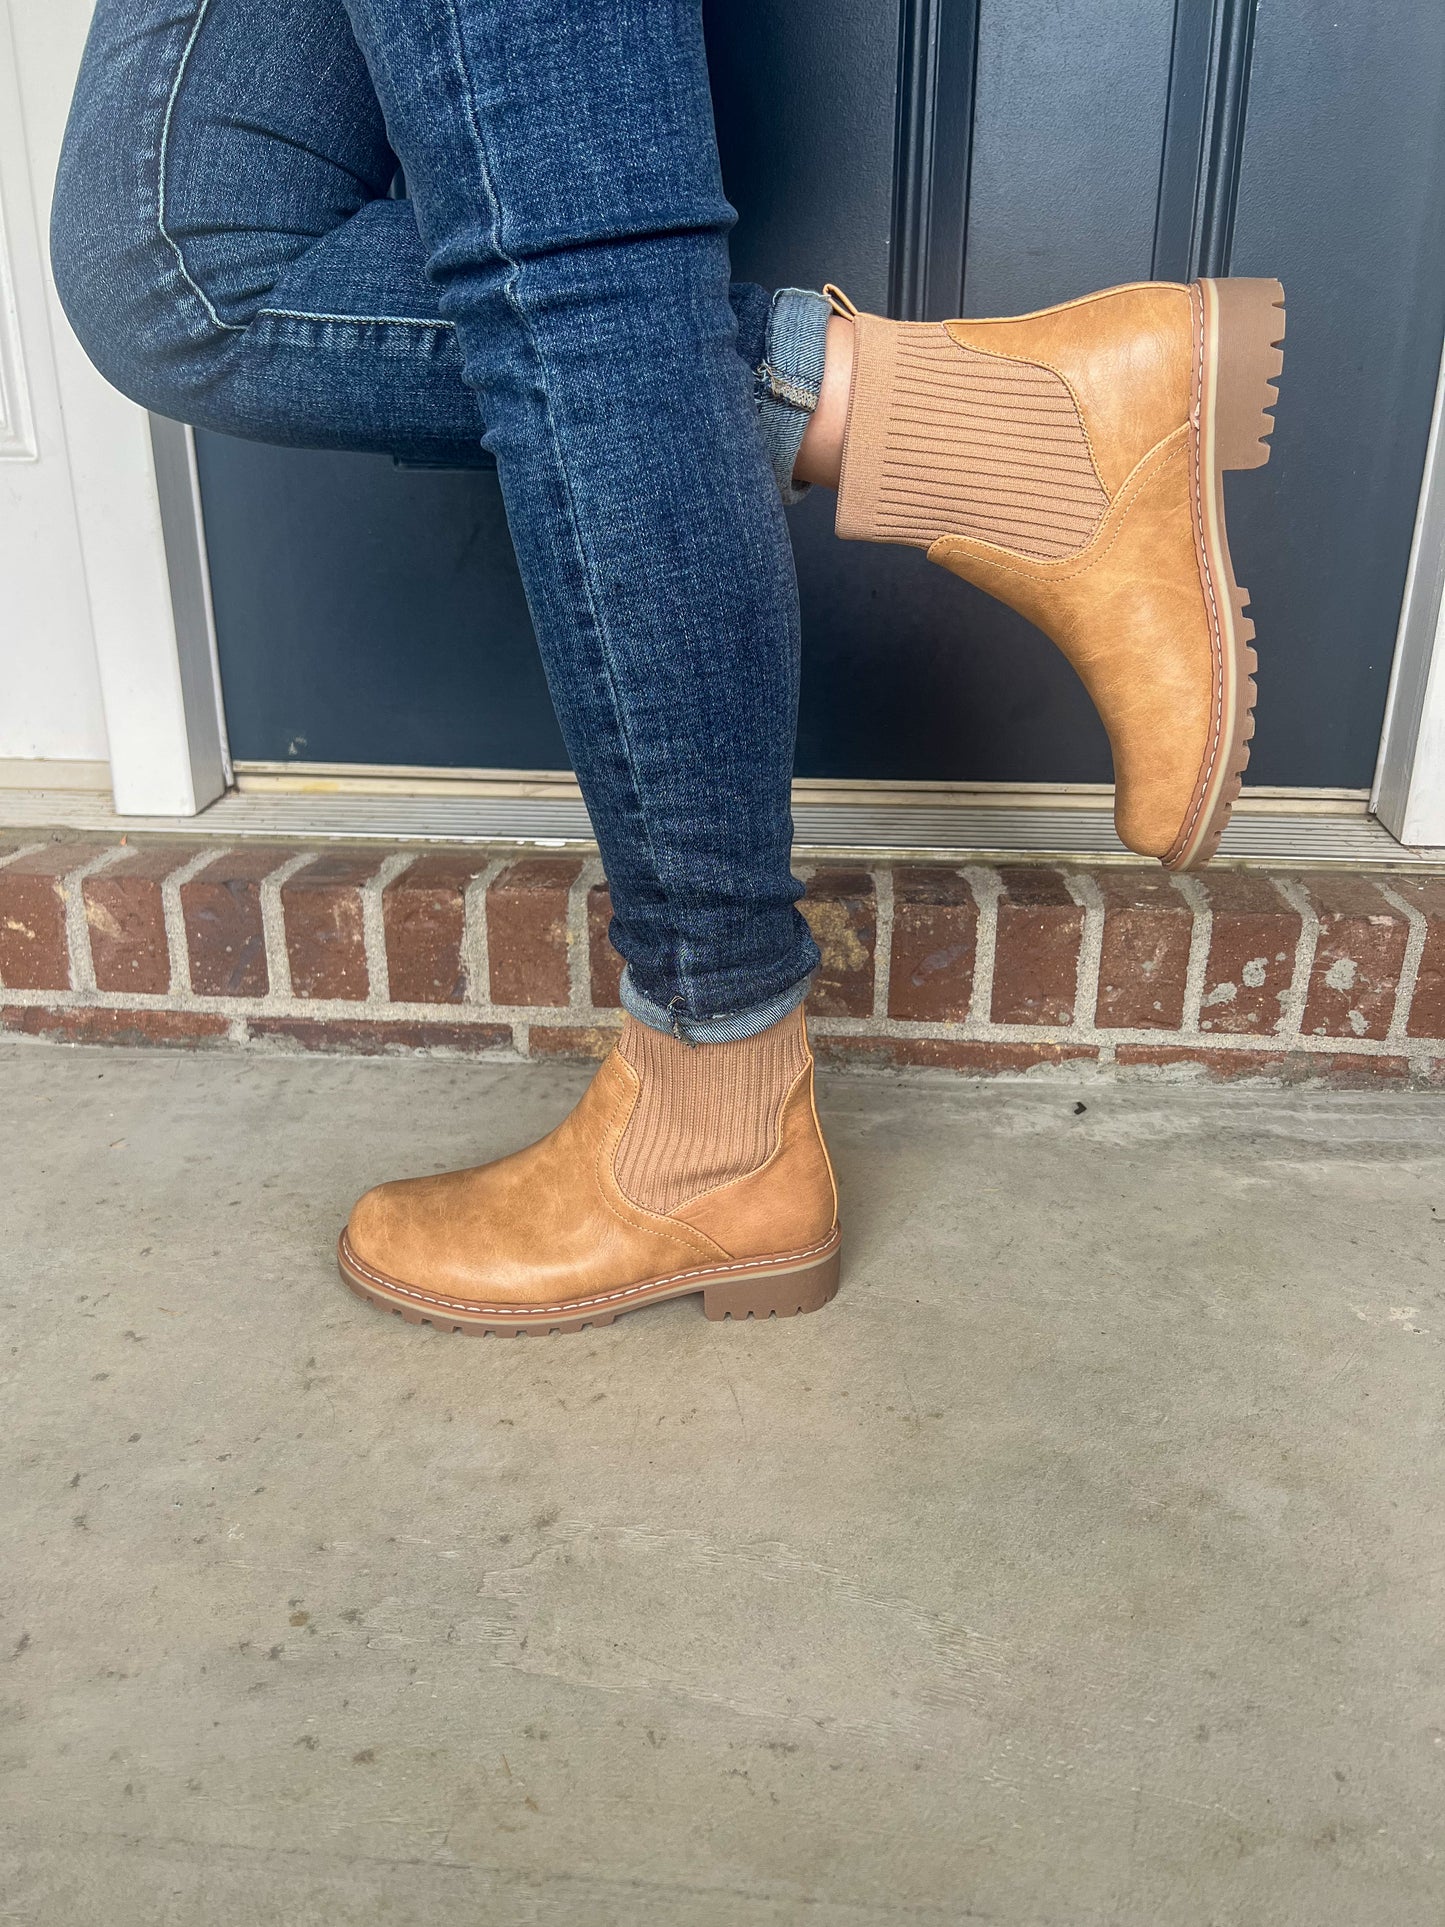 New! Corkys Cabin Fever Boot - Caramel